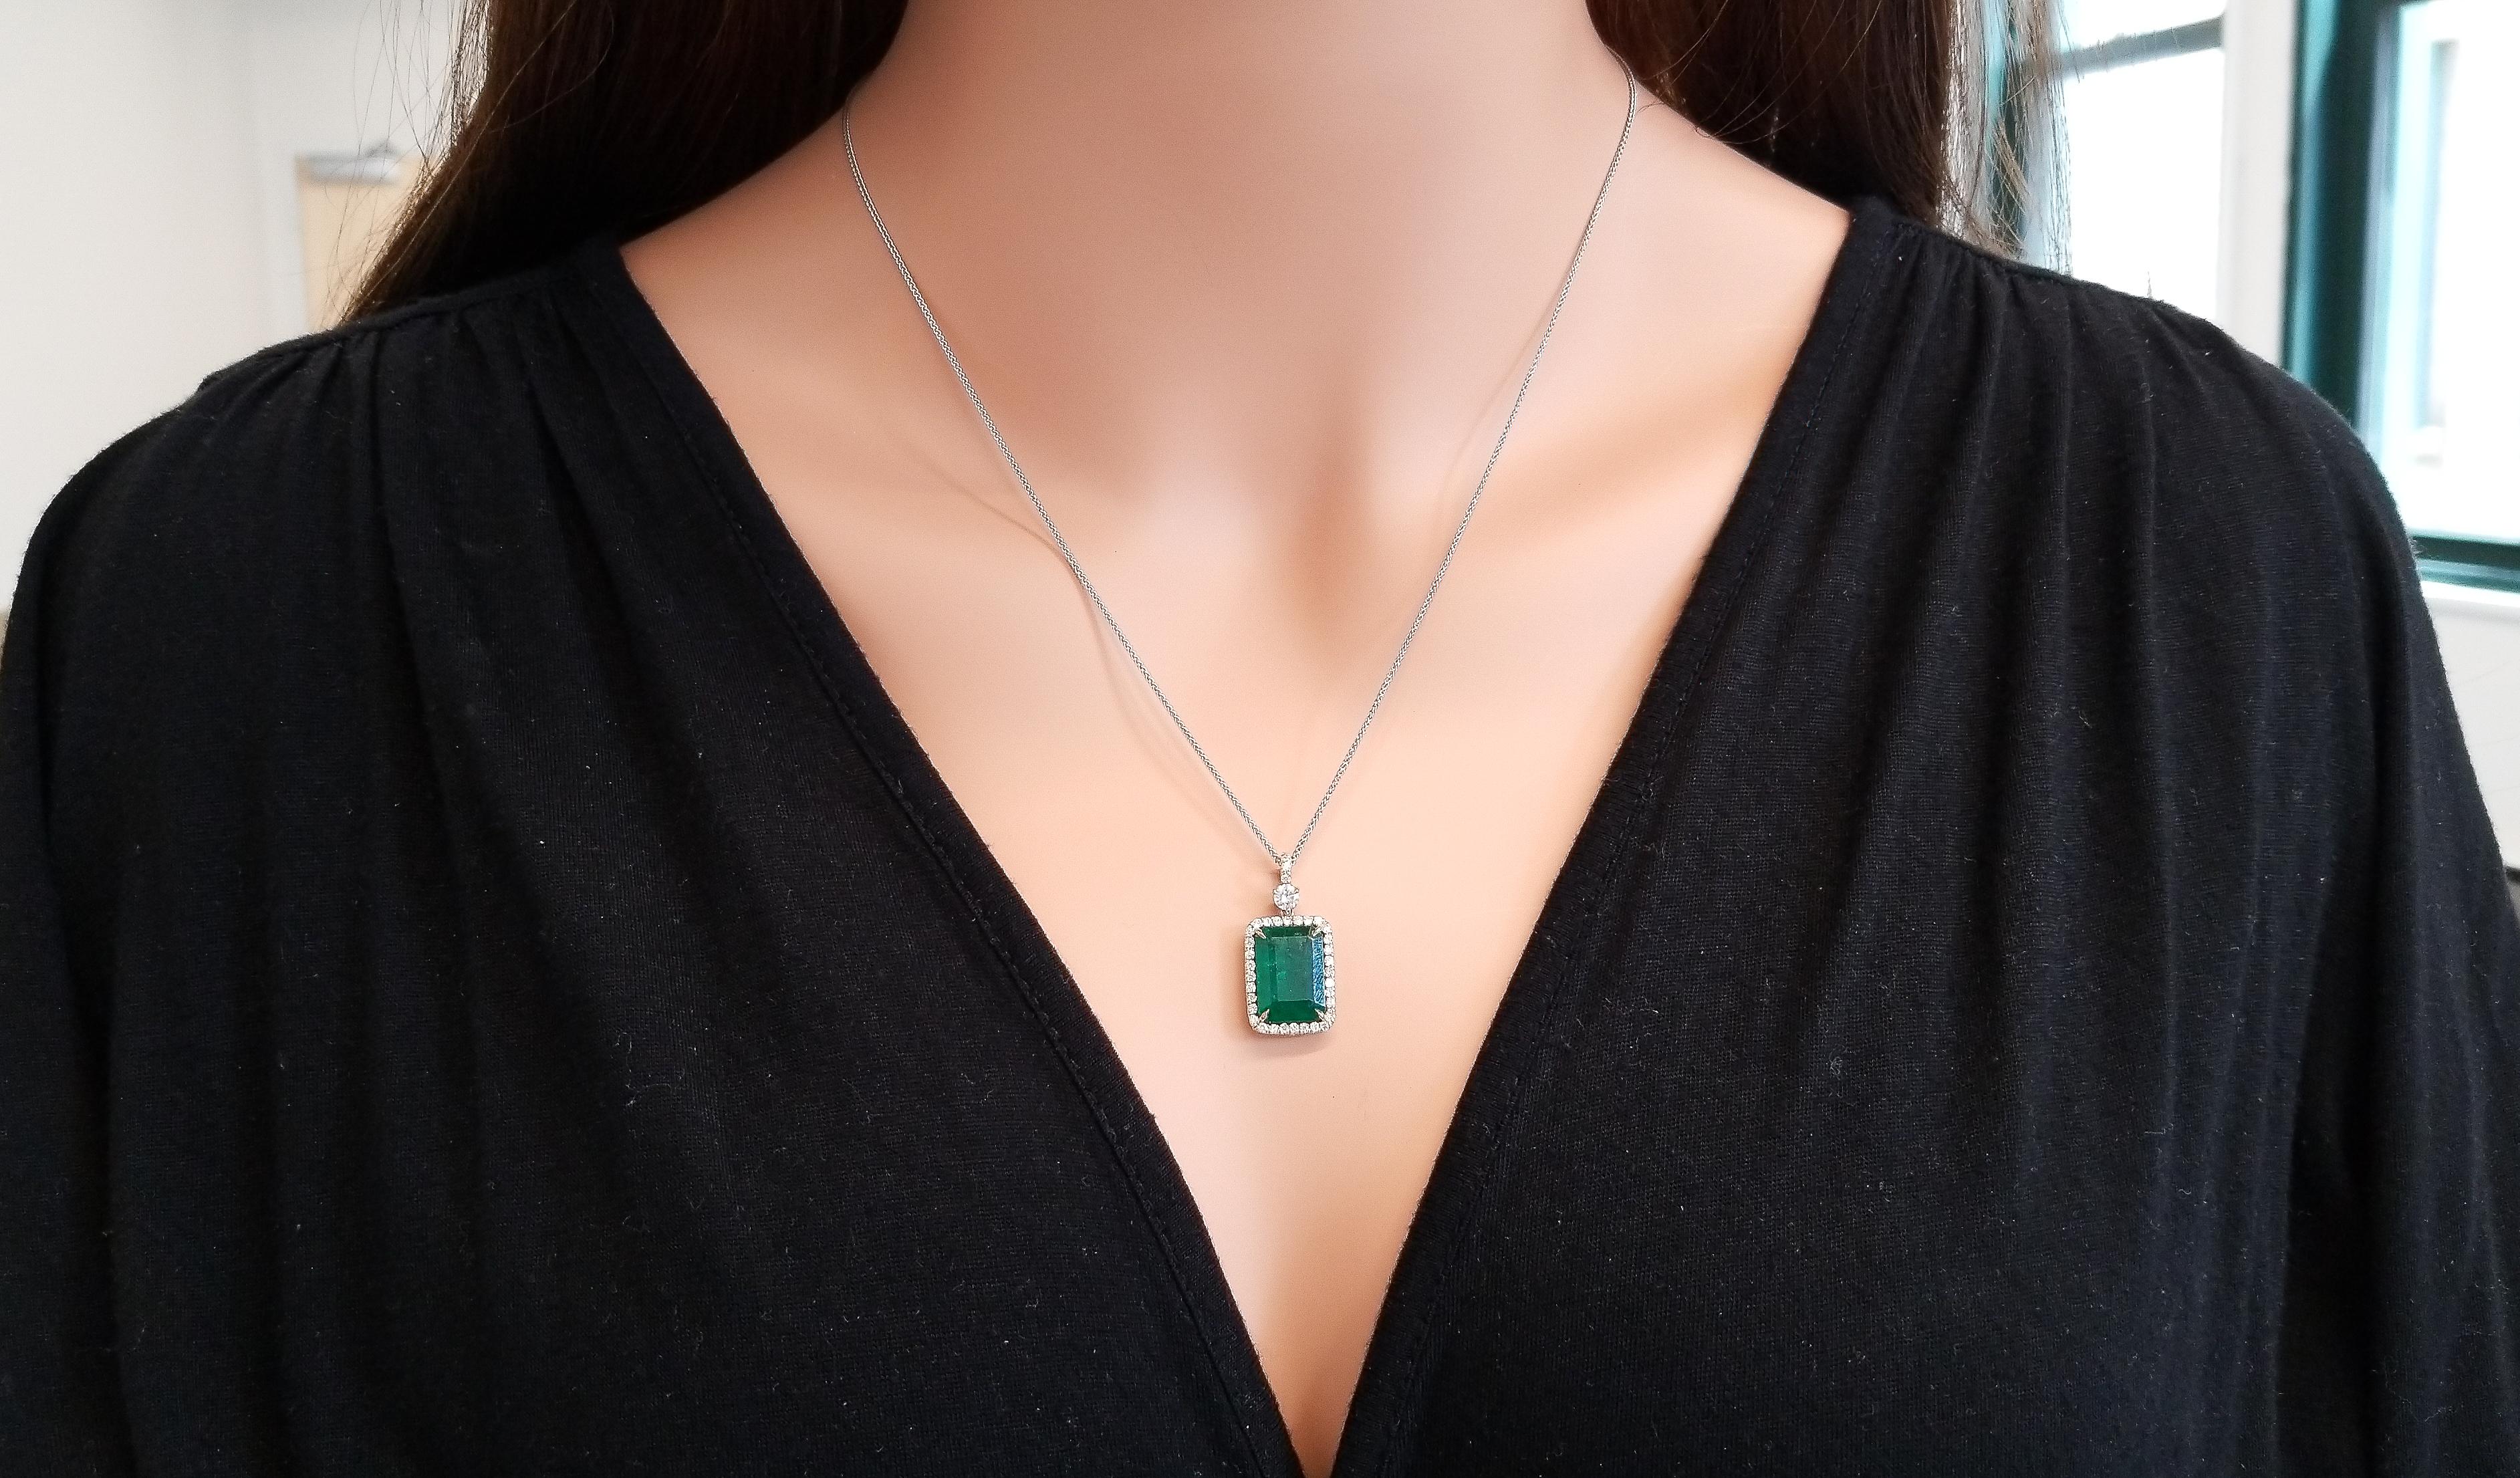 This is a 5.23 carat radiant cut emerald that takes the spotlight on this elegant dangle pendant in a prong setting with measurements of 13.5mm x 9.5mm. The gem origin is Zambia. The transparency and color is what you want. The luscious green of the